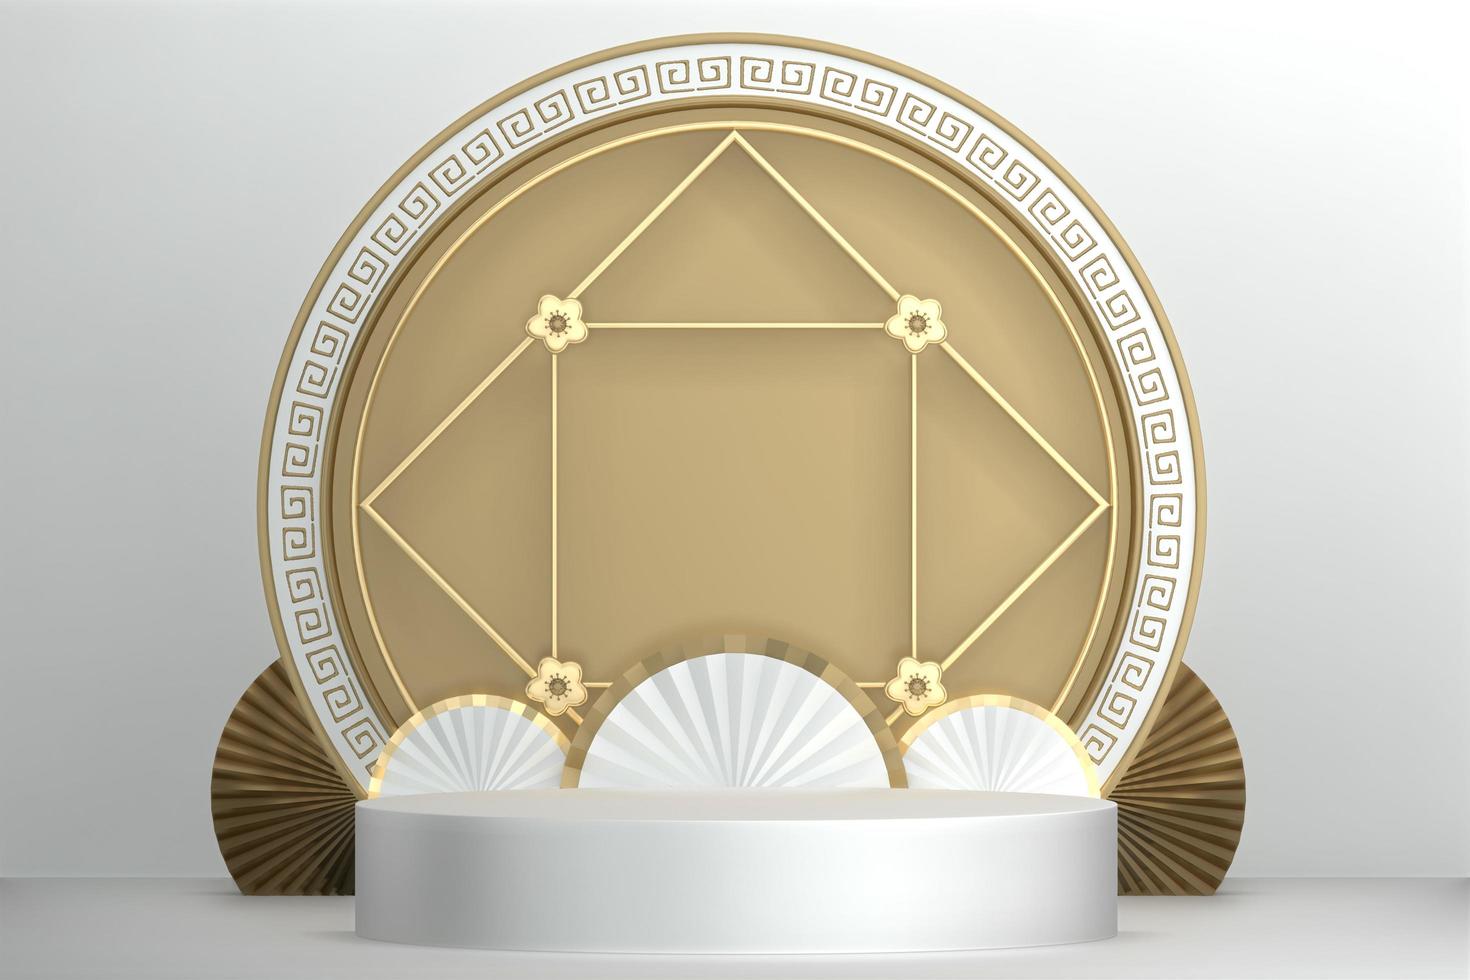 Abstract Podium minimal geometric white and gold.3D rendering photo